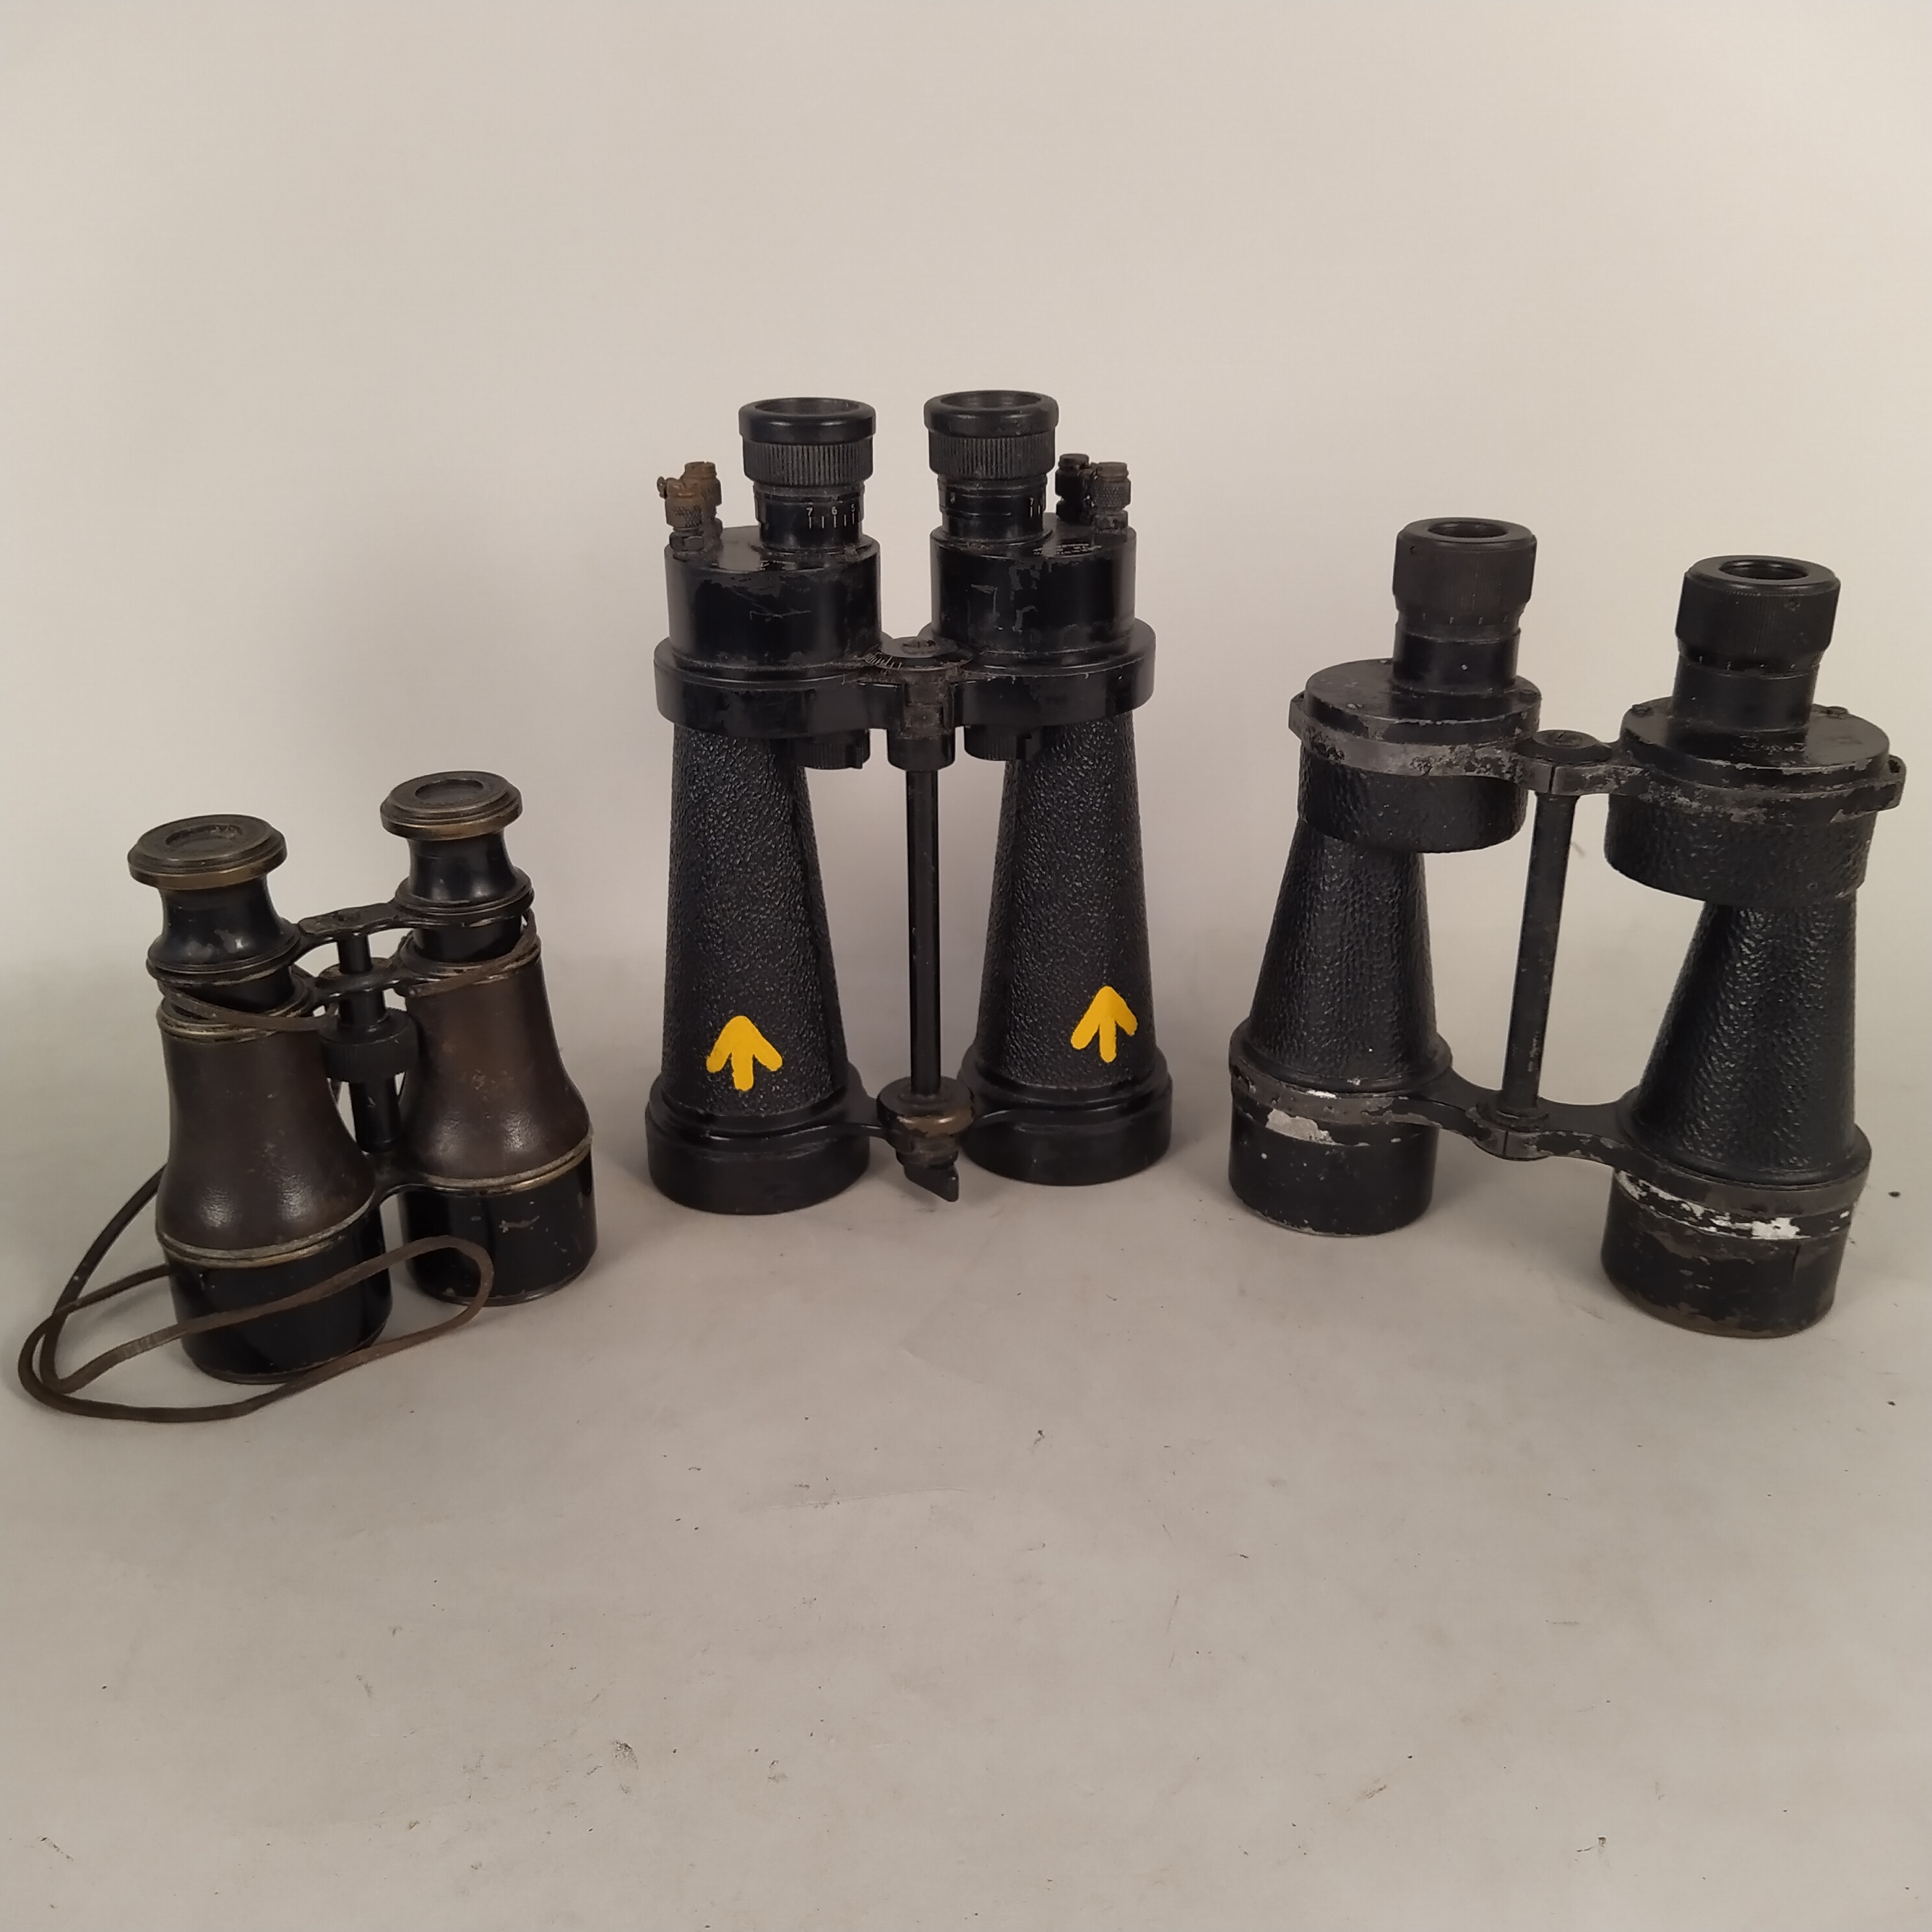 Four pairs of vintage binoculars by Barr & Stroud, Ross, - Image 2 of 3